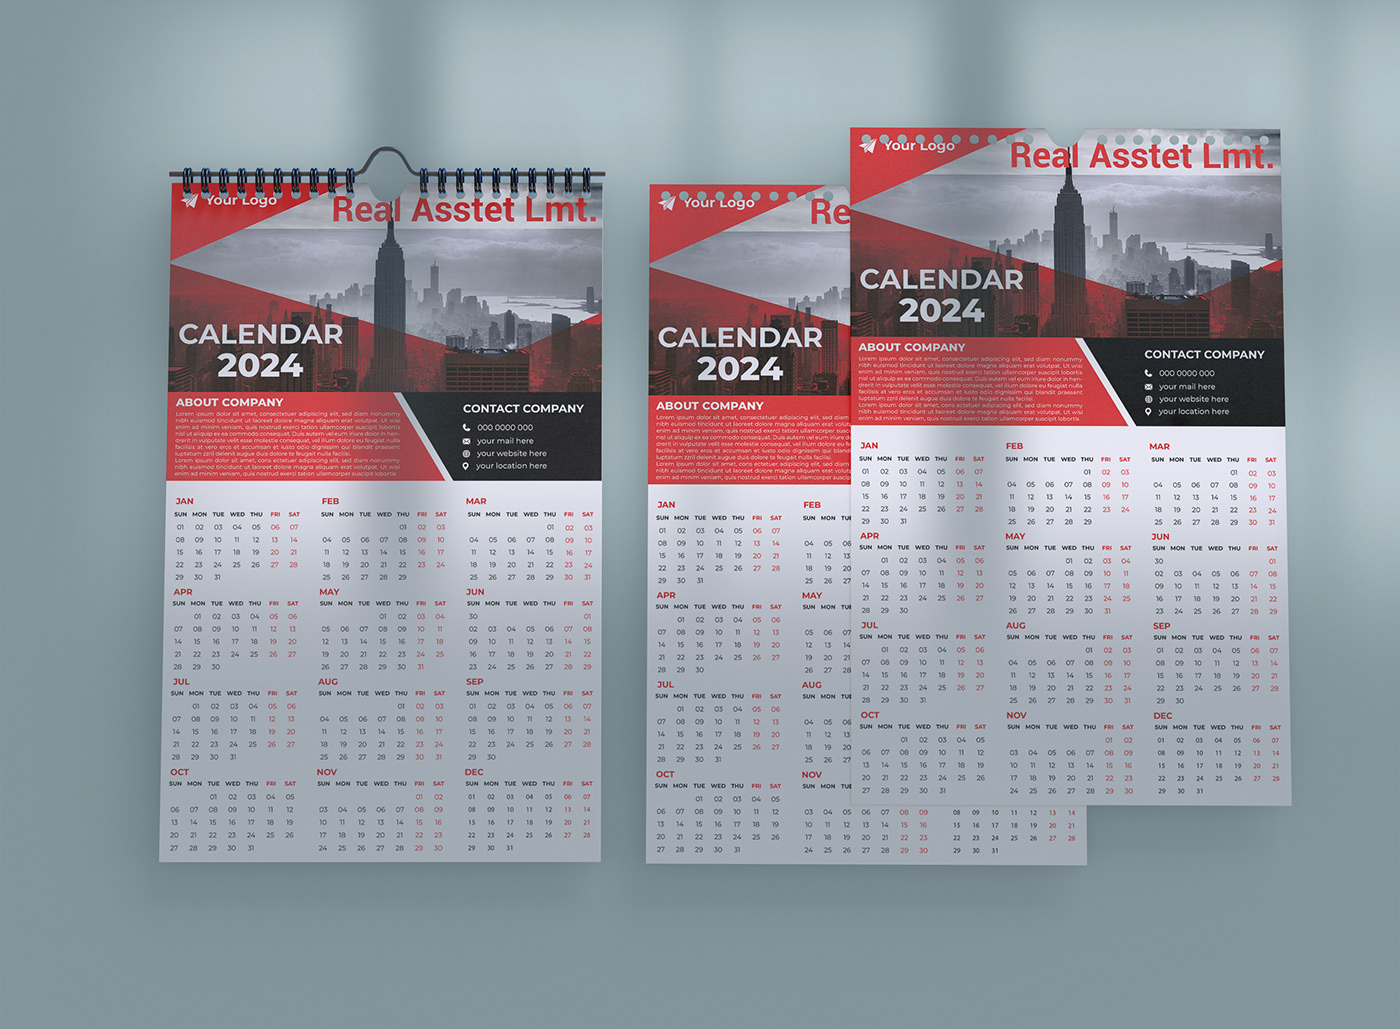 calendar calendar design calendar 2024 designer design date year month new year Day